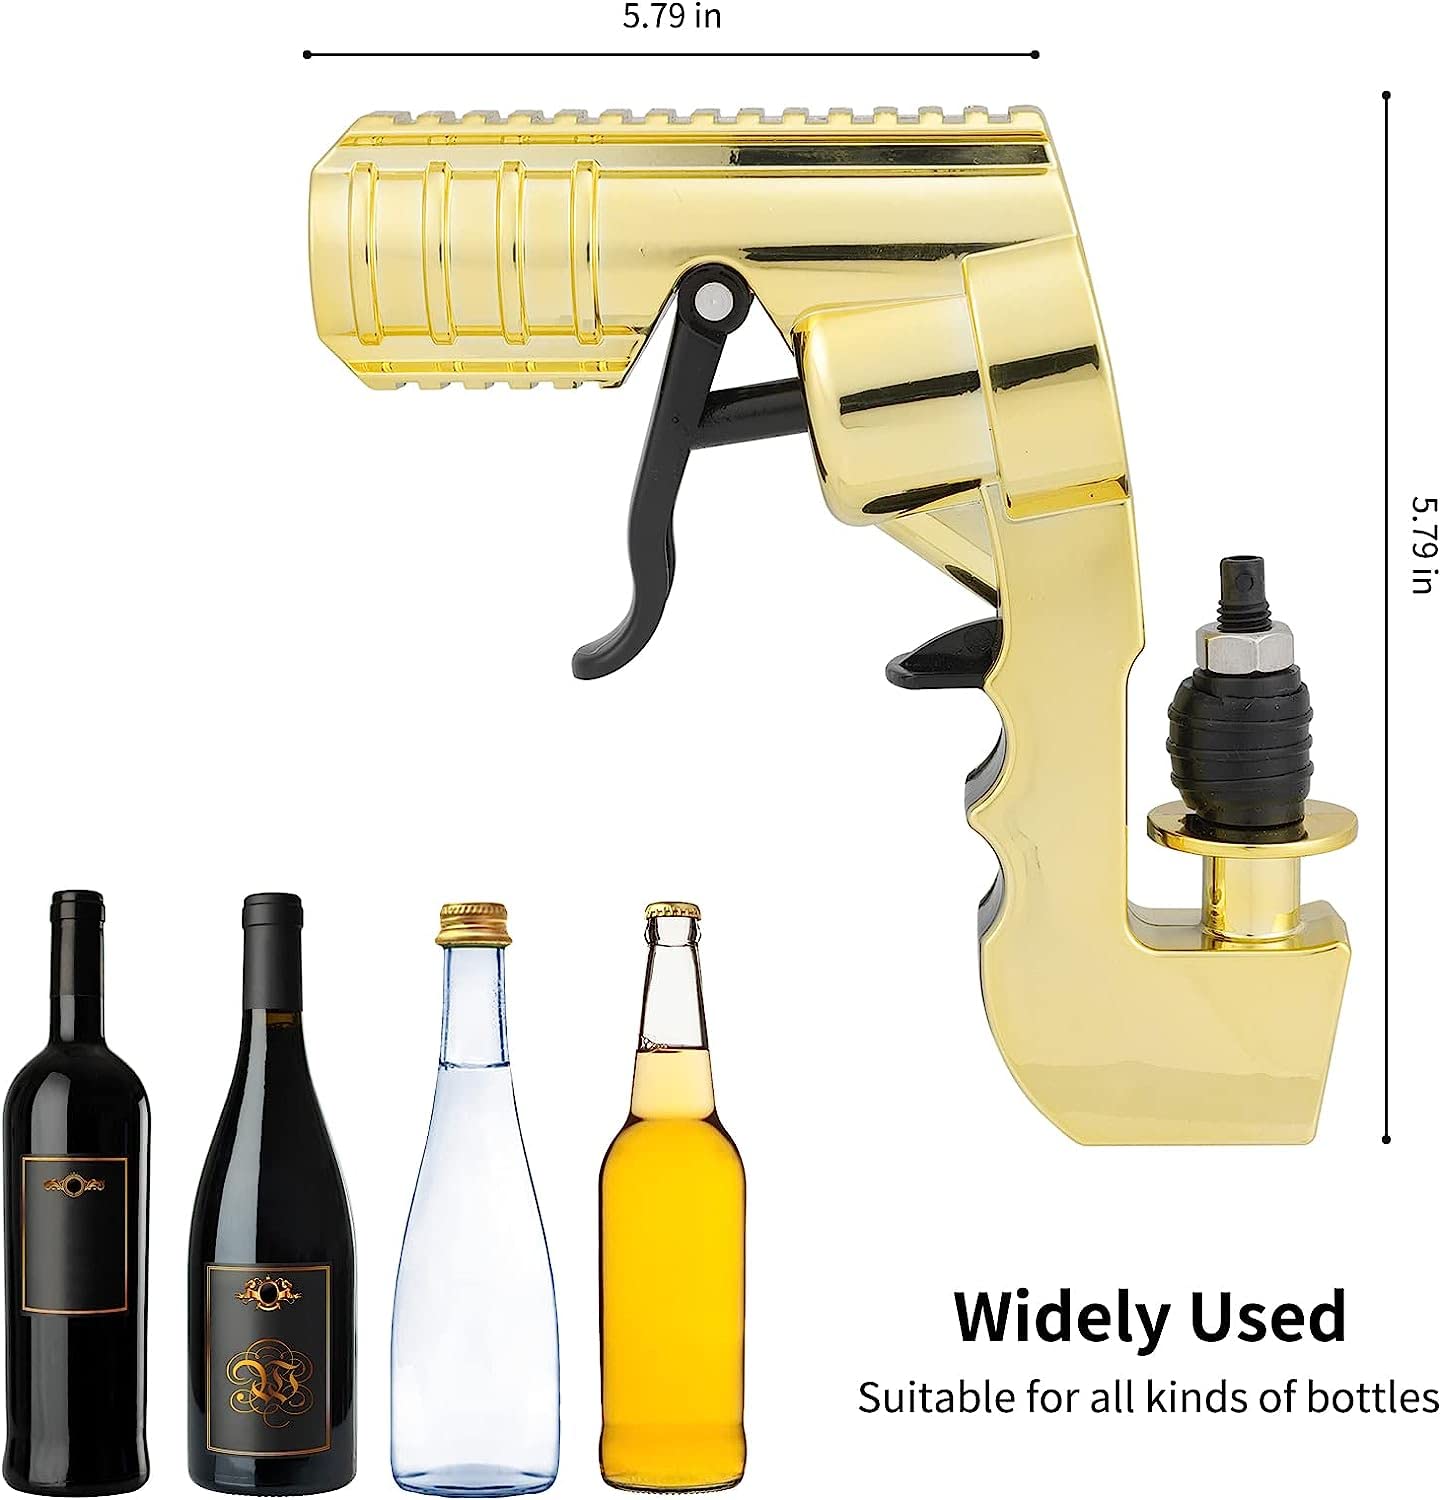 Champagne Gun 4th Generation Upgraded Party Shooter with Extended Range Perfect for Bachelorette Parties Birthdays Celebrations